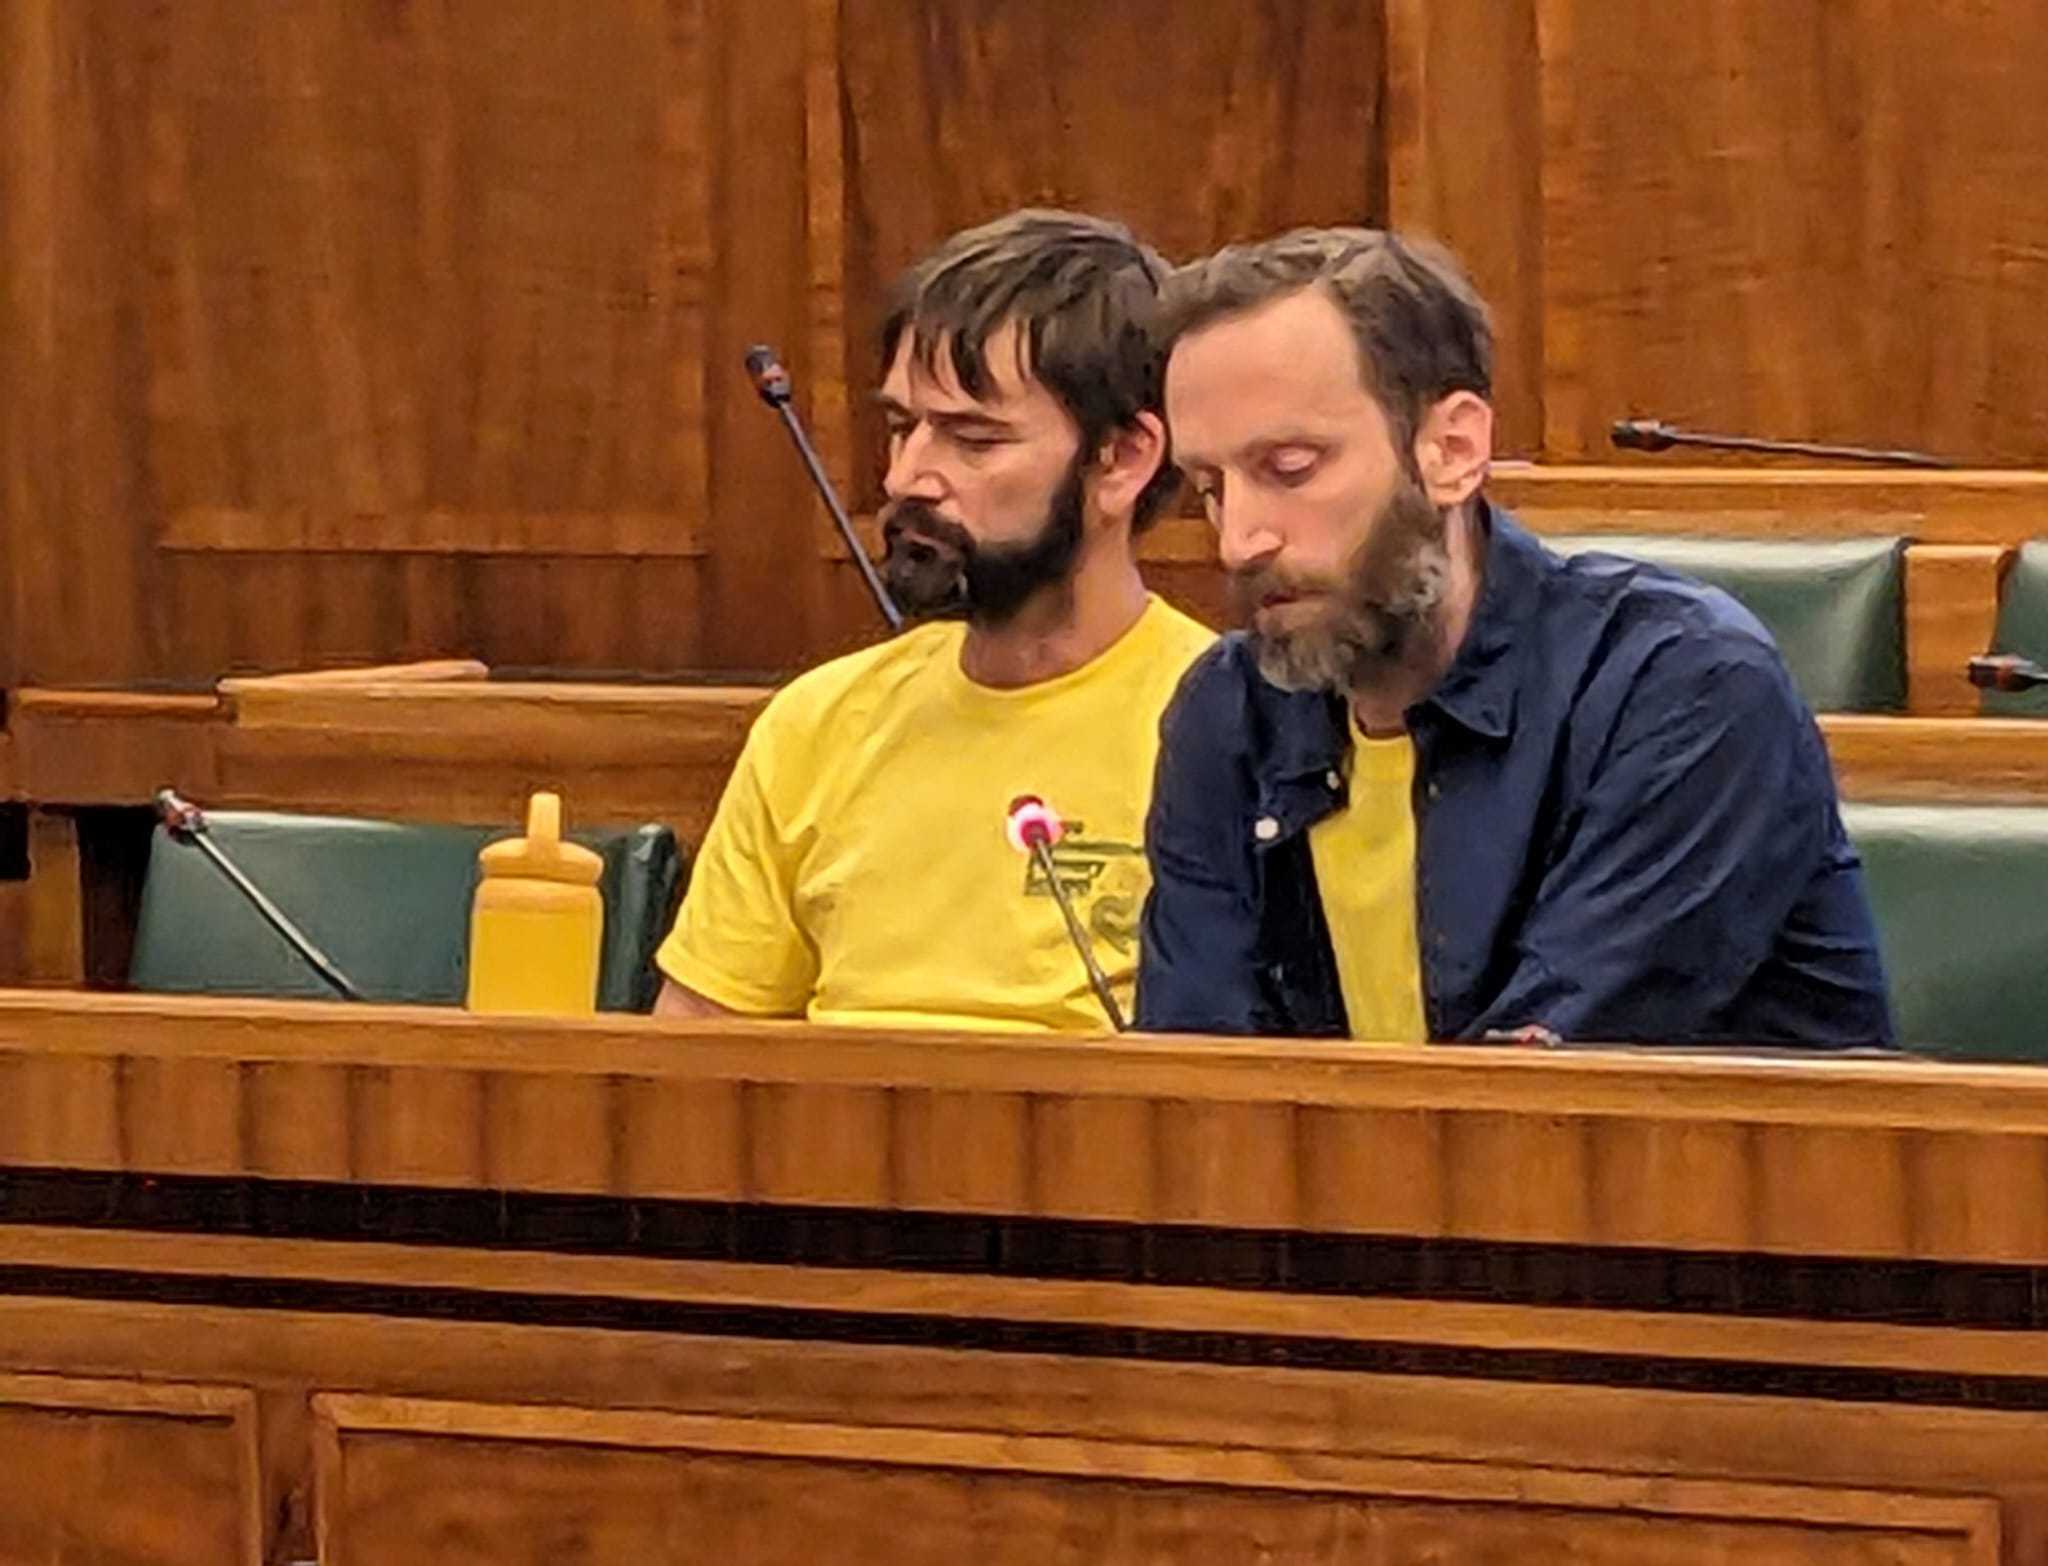 Chris Davis & Mike Cooter from Save Colvestone, speaking at Hackney Councils children & young peoples scrutiny commission. Photo: Julia Gregory